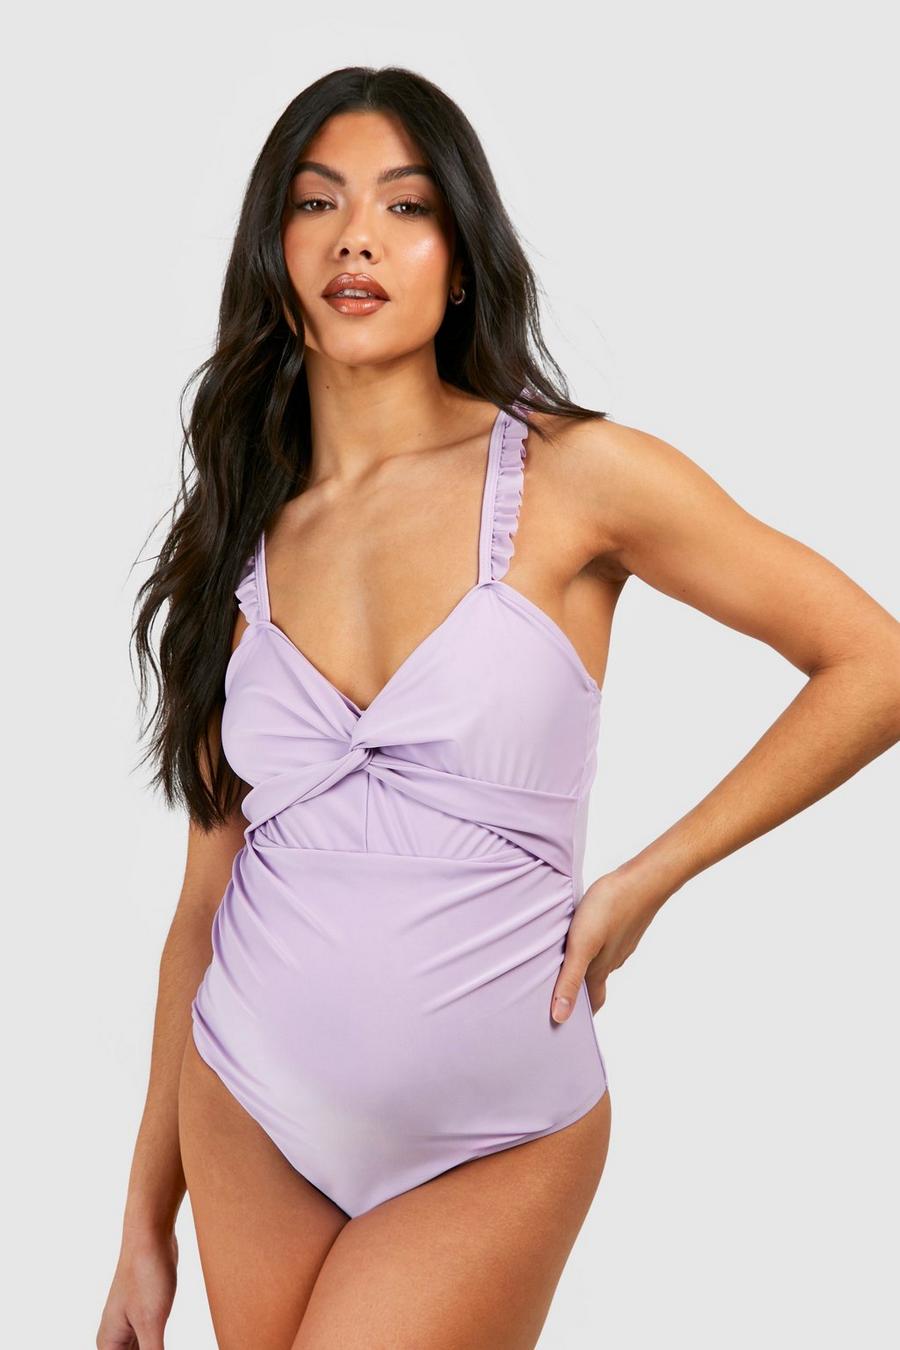 Janis Tie Front One Piece Maternity Swimsuit - Maternity Wedding